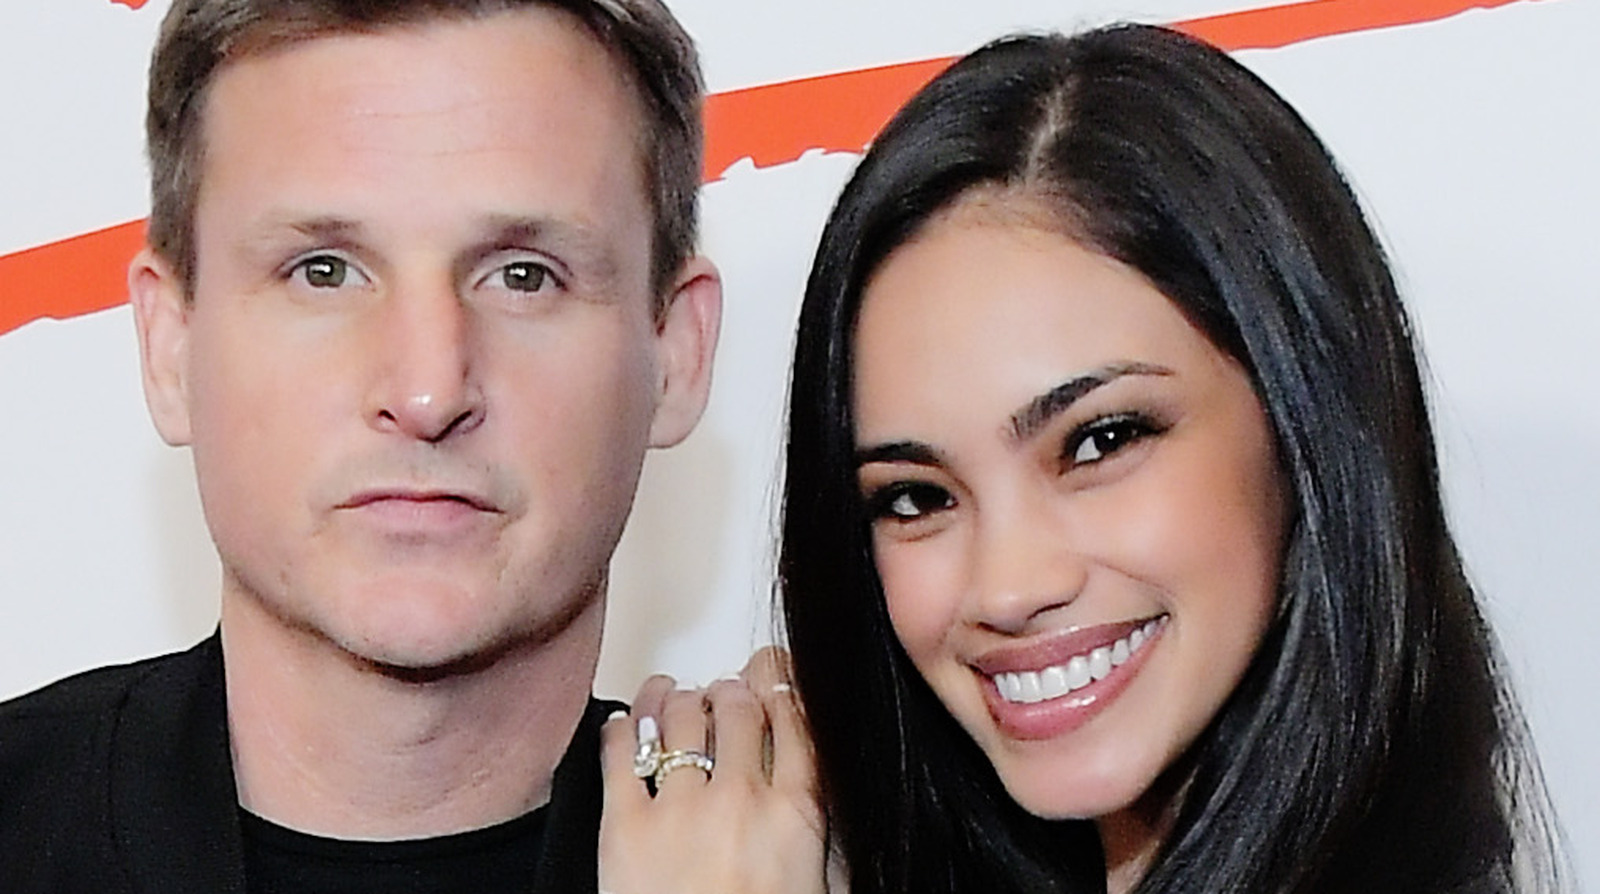 Bryiana Noelle Flores with her husband Rob Dyrdek at an event